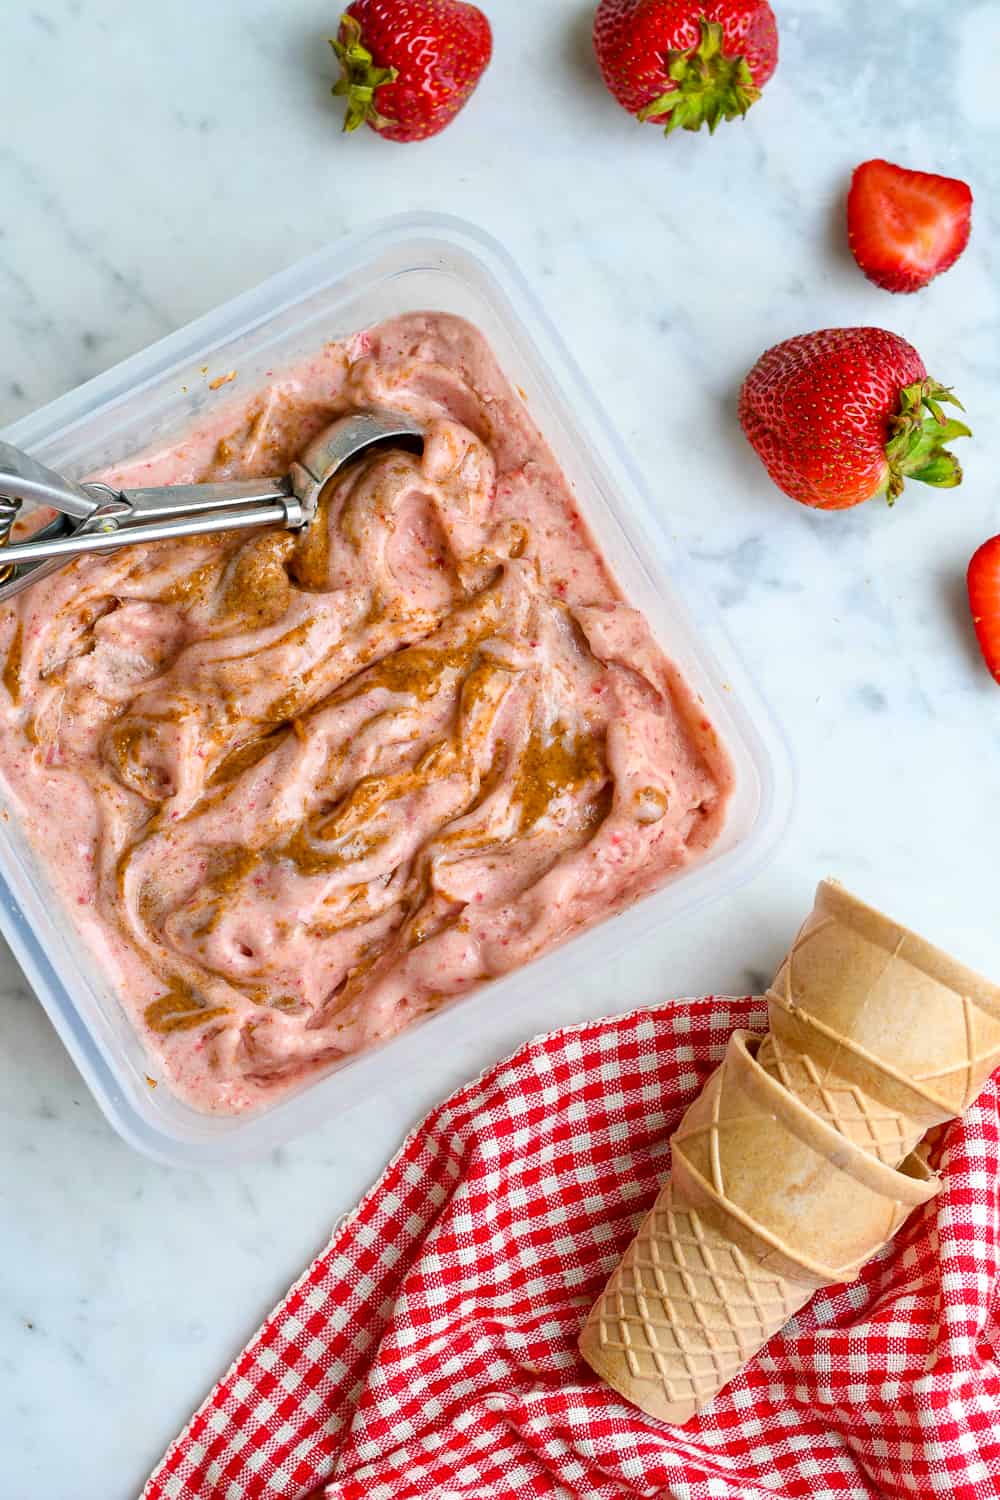 Vegan Strawberry Almond Butter Ice Cream in container with cones